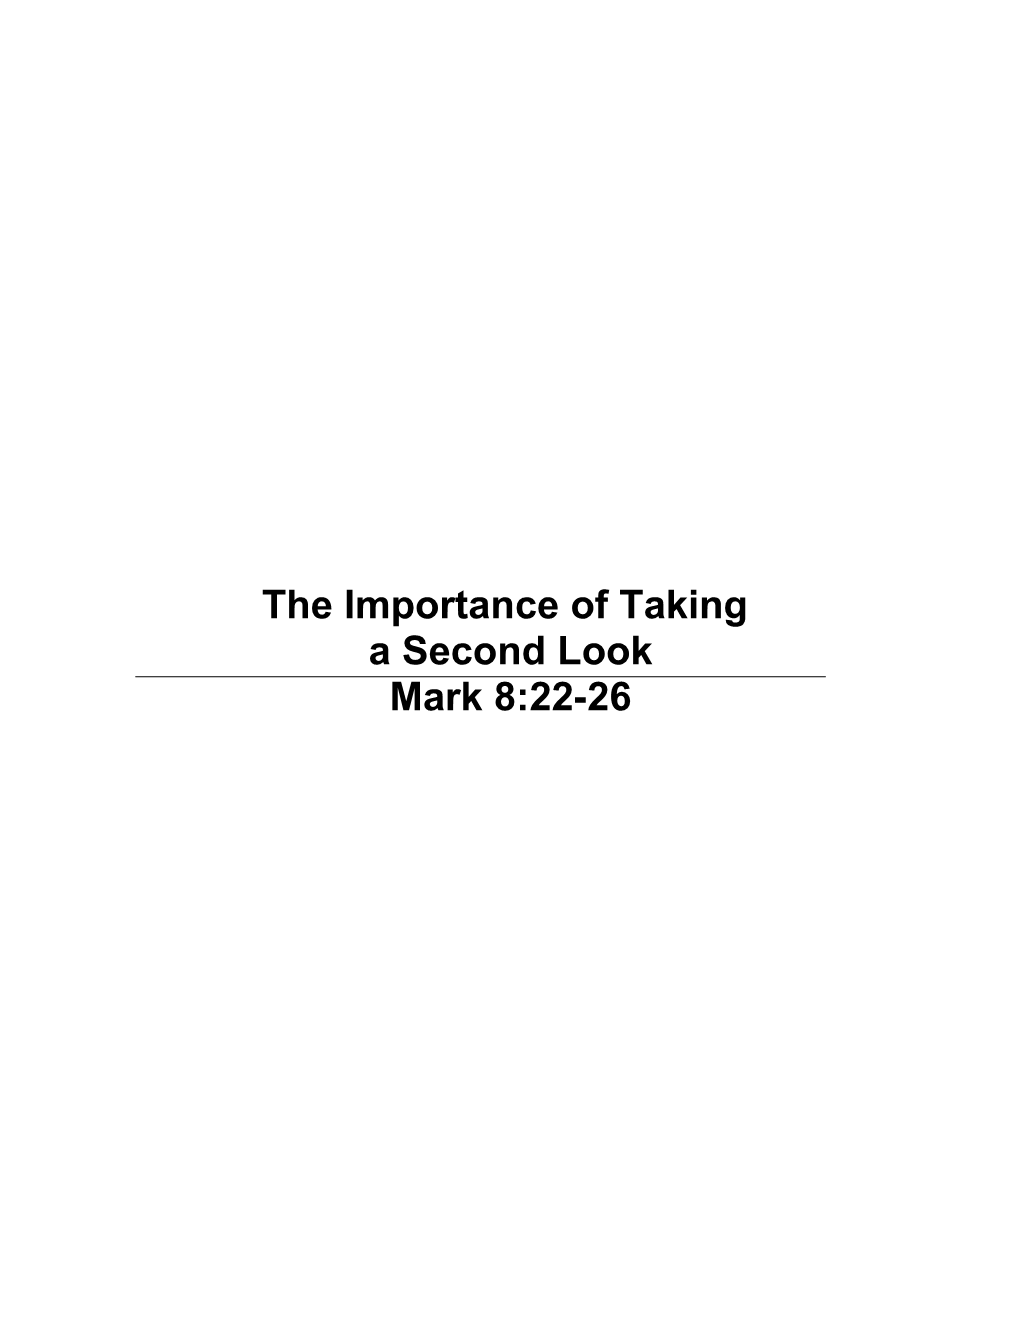 The Importance of Taking a Second Look